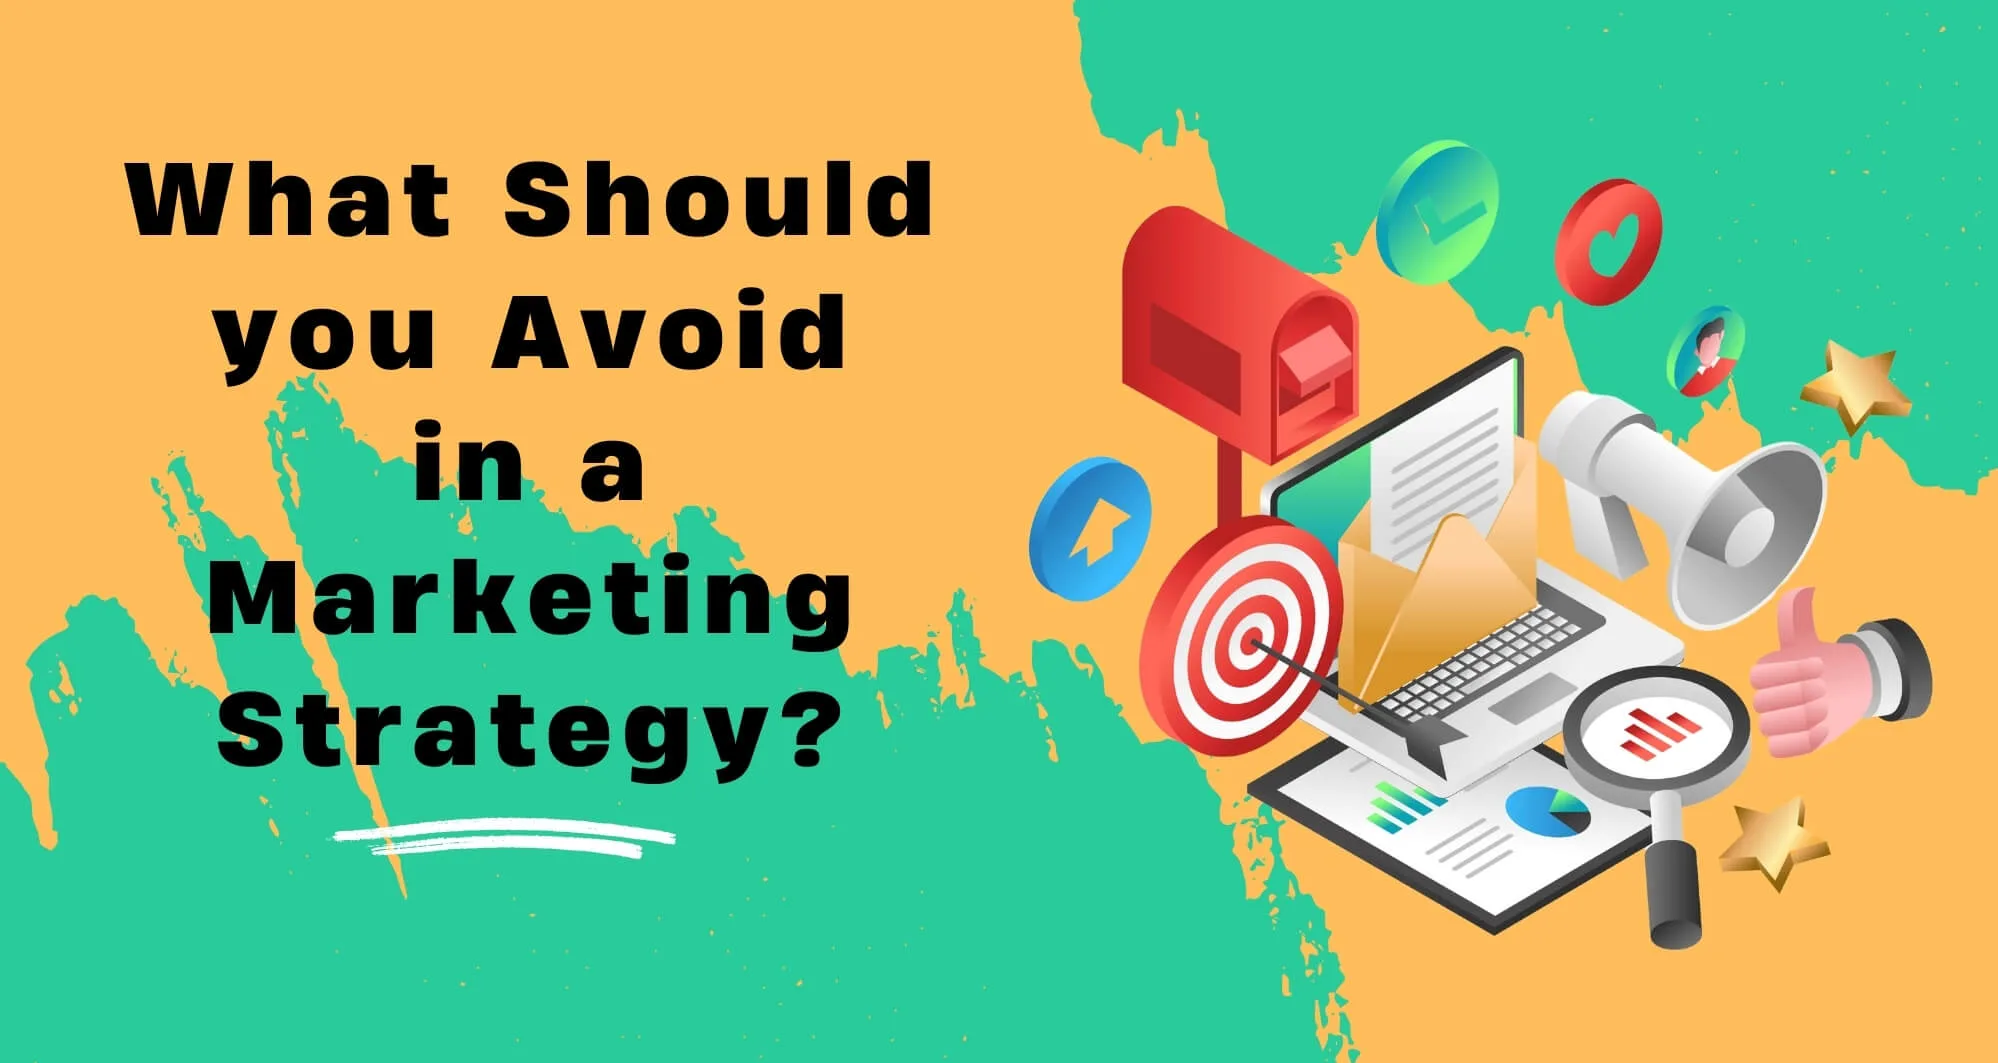 What Should you Avoid in a Marketing Strategy?